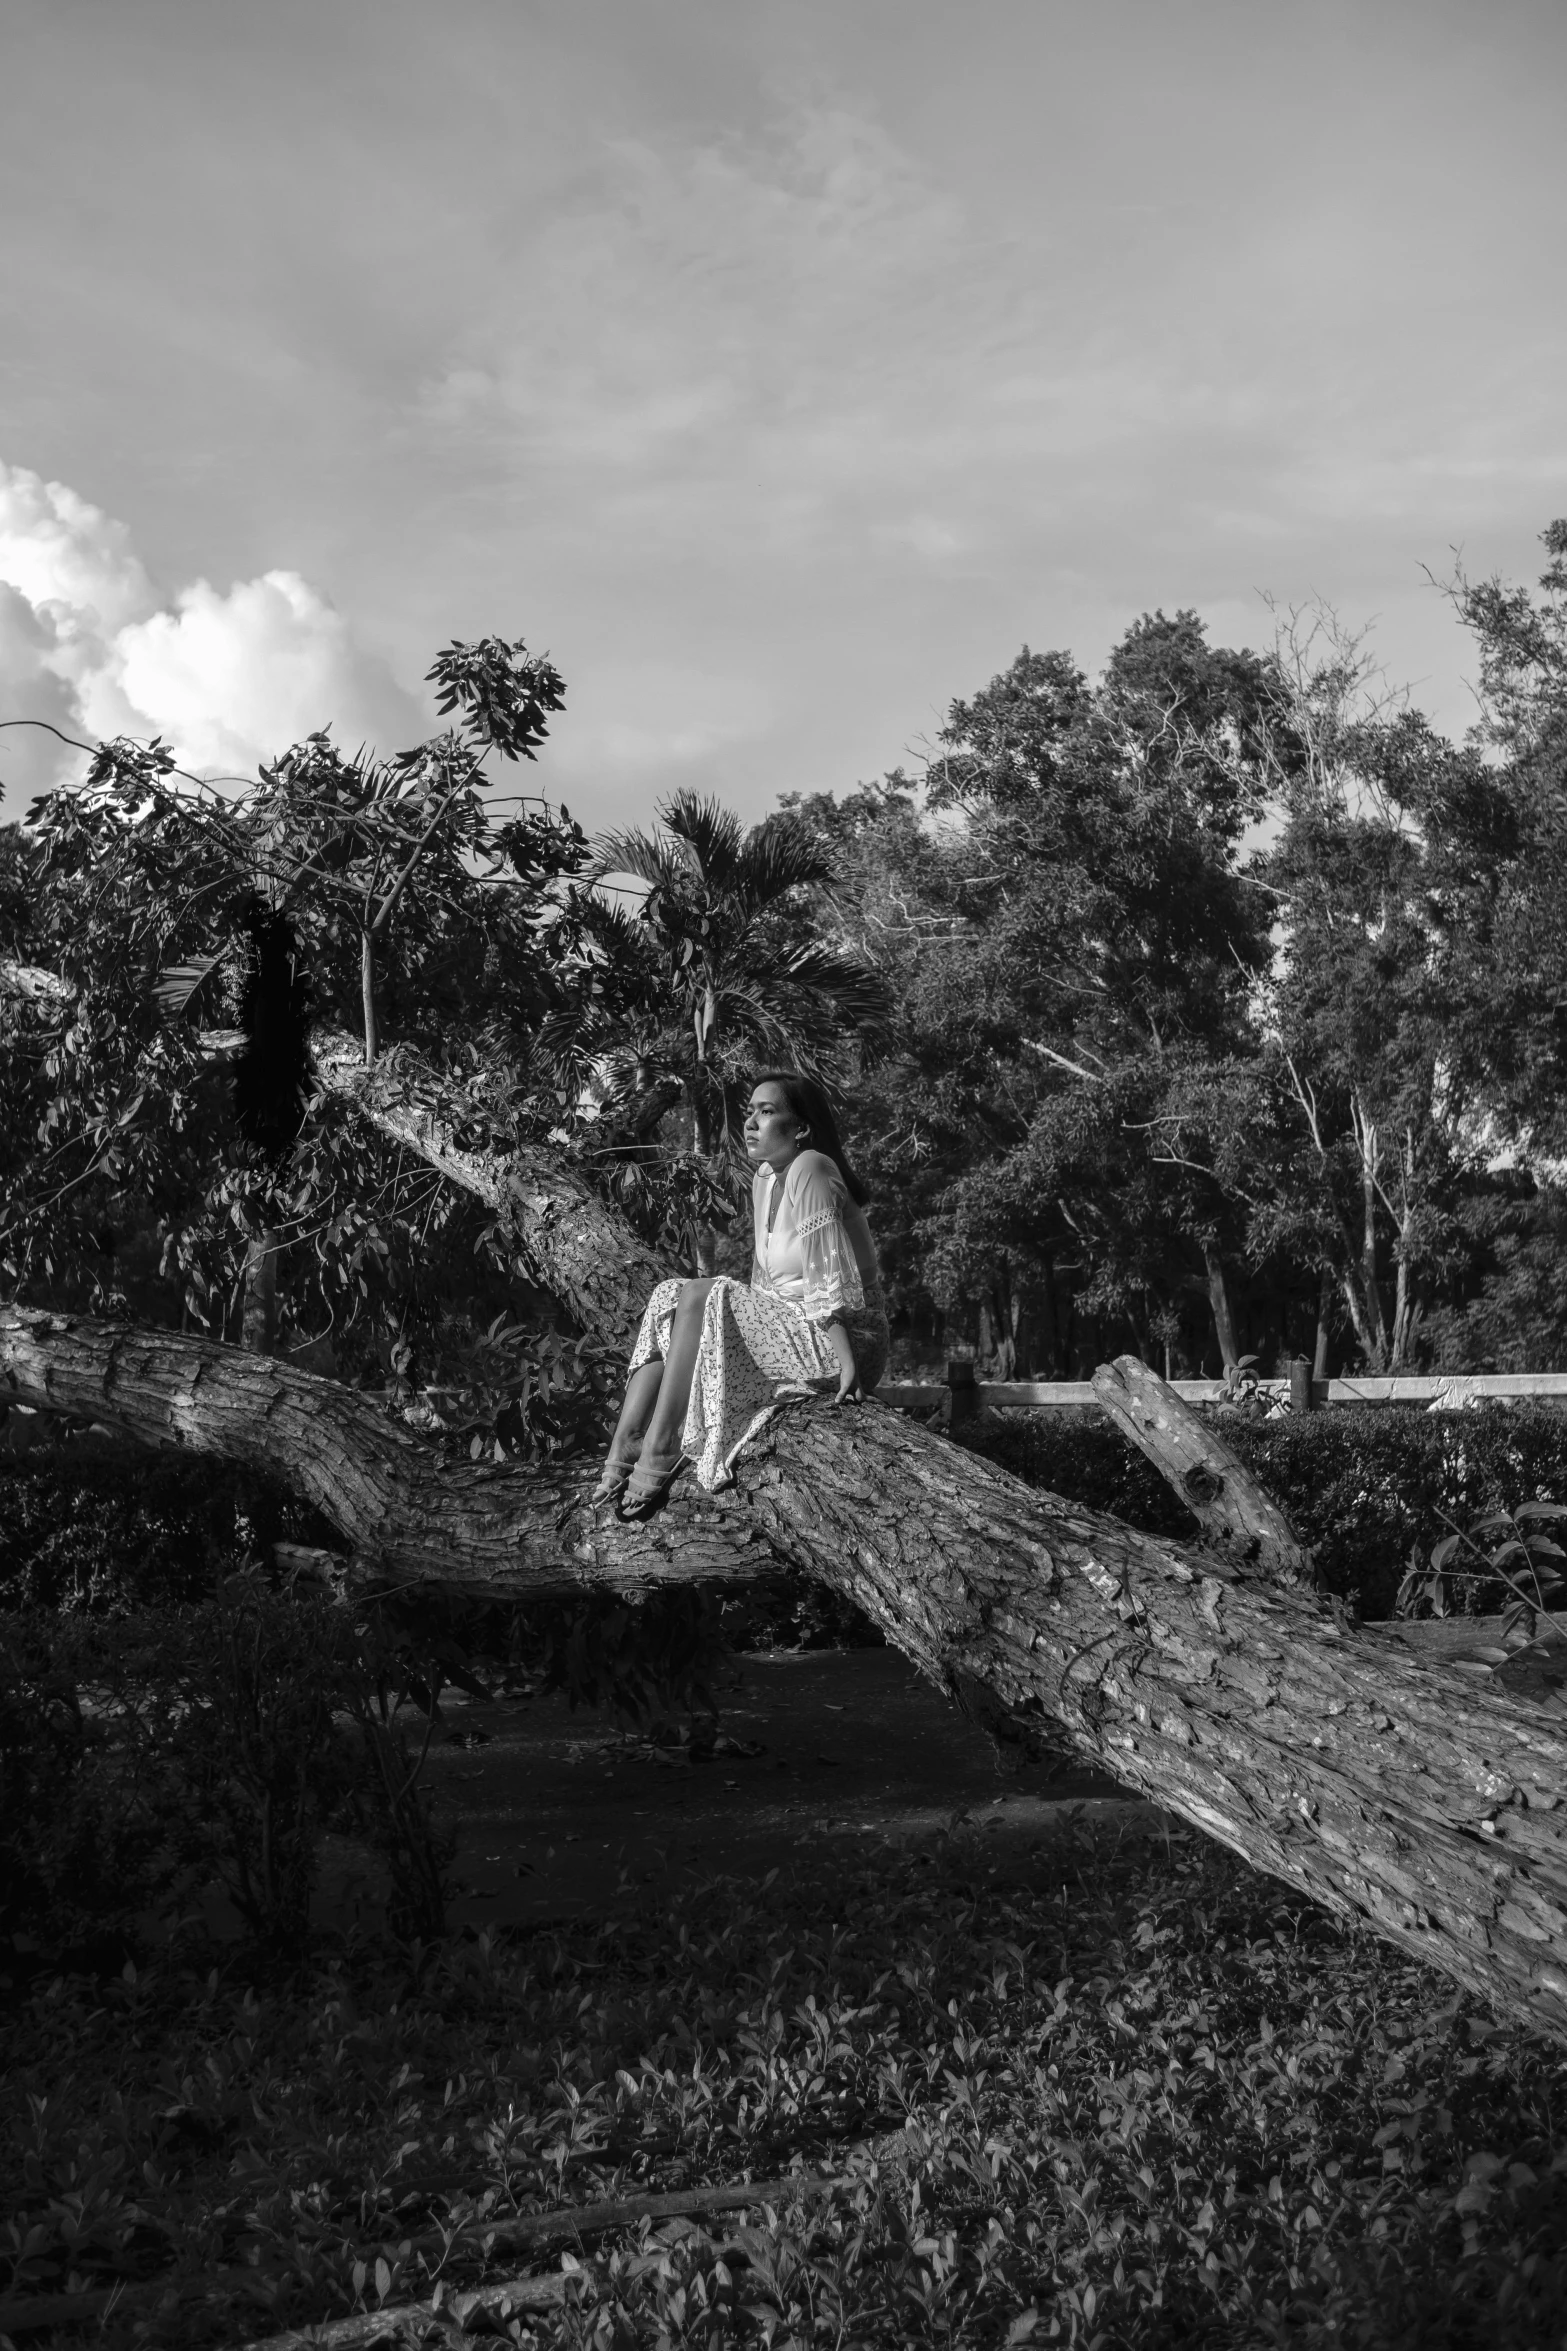 a black and white photo of a woman sitting on a fallen tree, 2010s, after the storm, kuntilanak on bayan tree, modelling